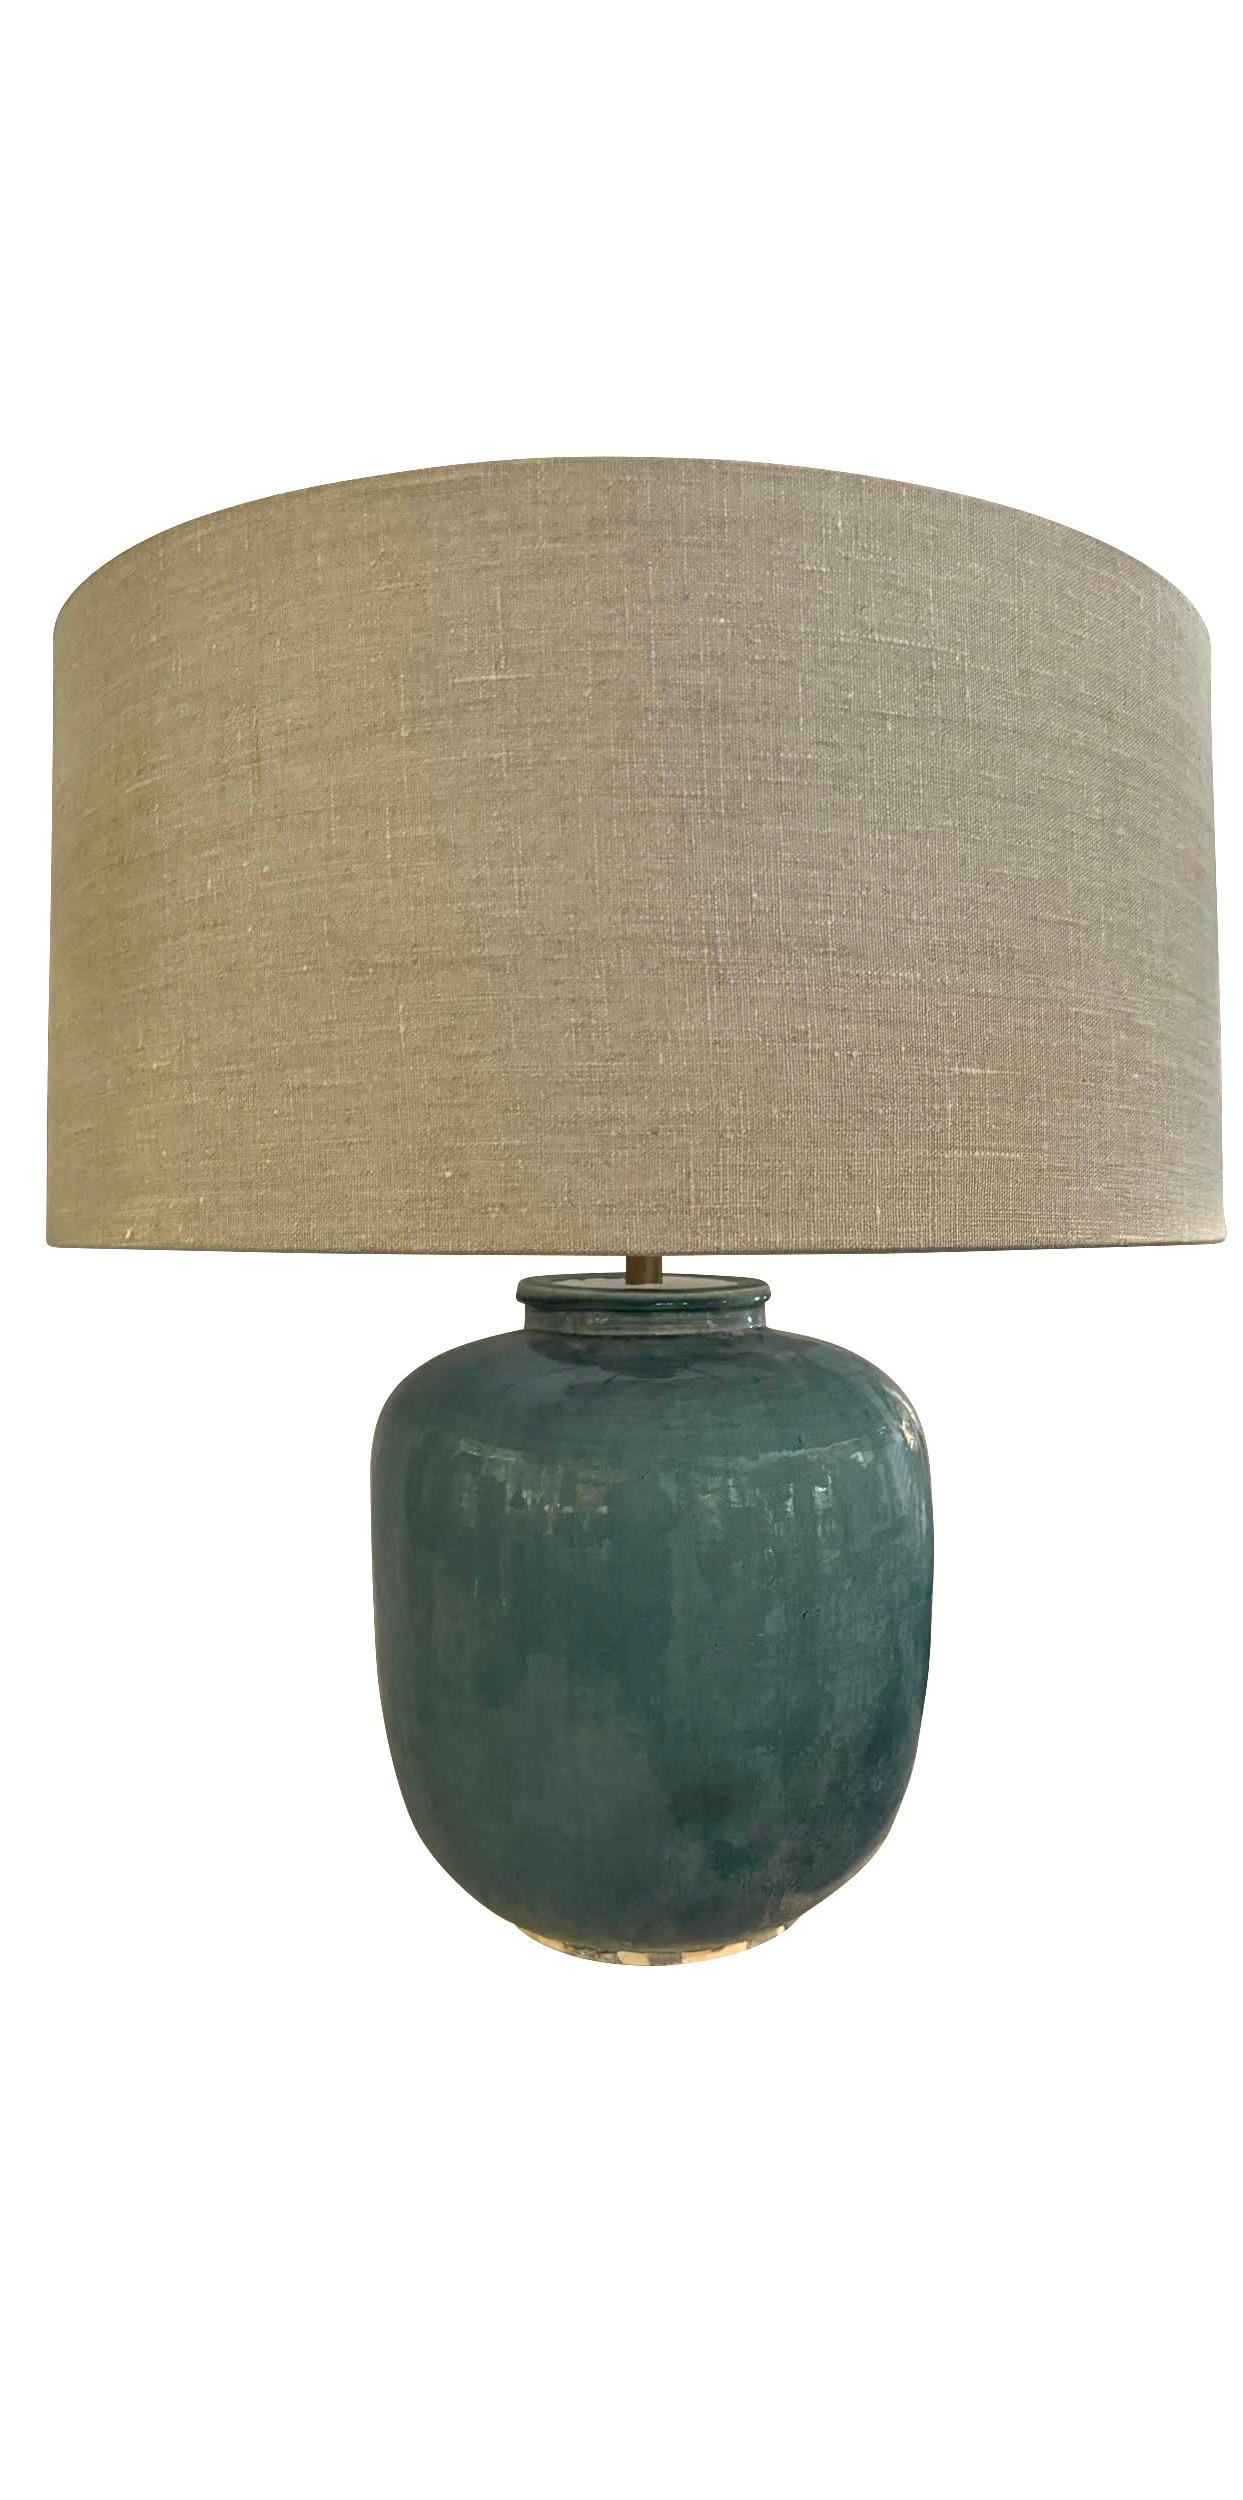 Contemporary Chinese pair of barrel shaped base lamps with a washed turquoise glaze.
New Belgian linen shades diameter 19.5